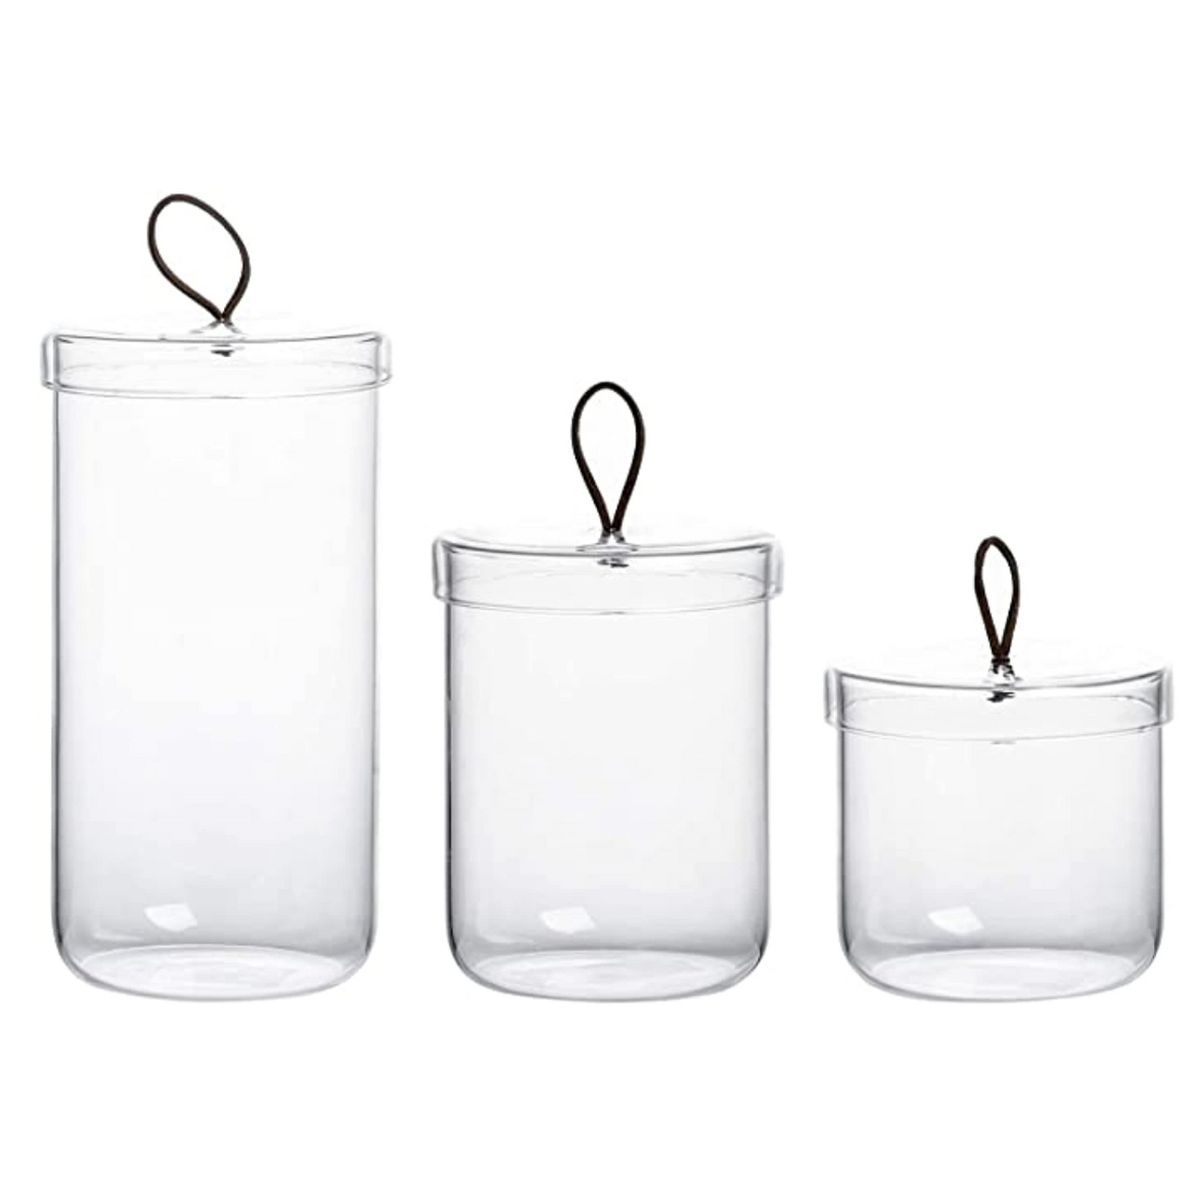 Whole Housewares Premium Glass Apothecary Jars for Cotton with Handle | Target